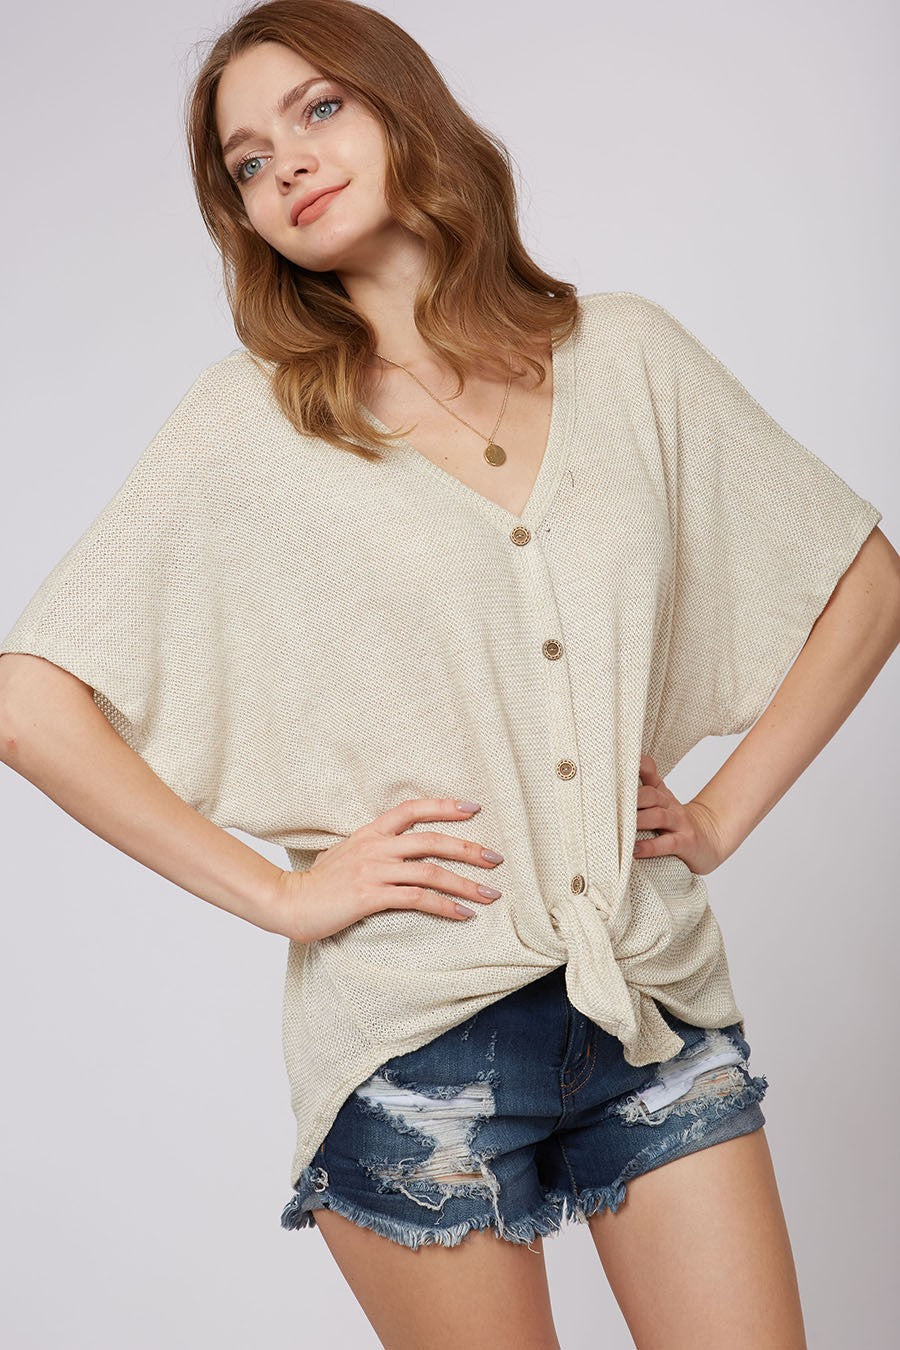 Classy Button Down Top in Oatmeal